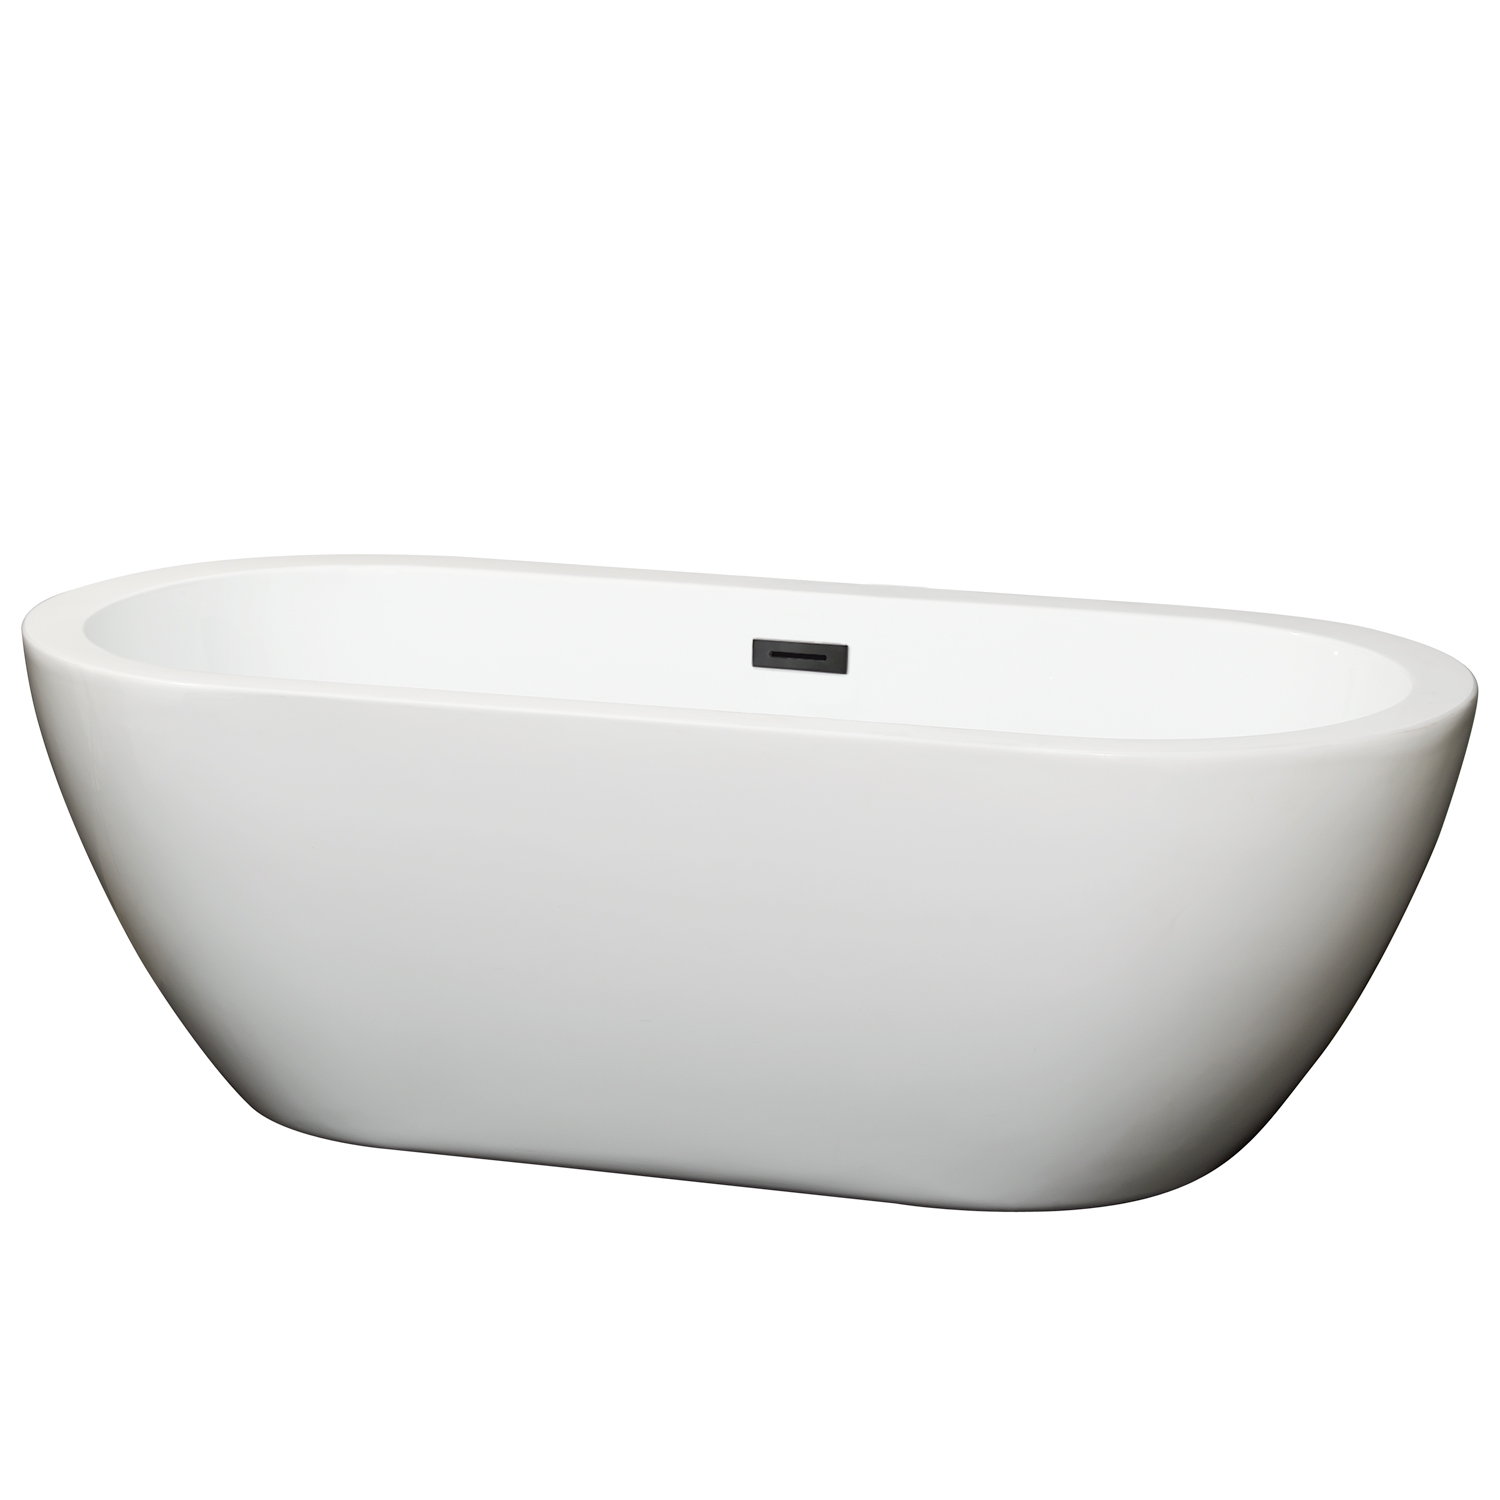 68" Freestanding Bathtub in White with Matte Black Drain and Overflow Trim